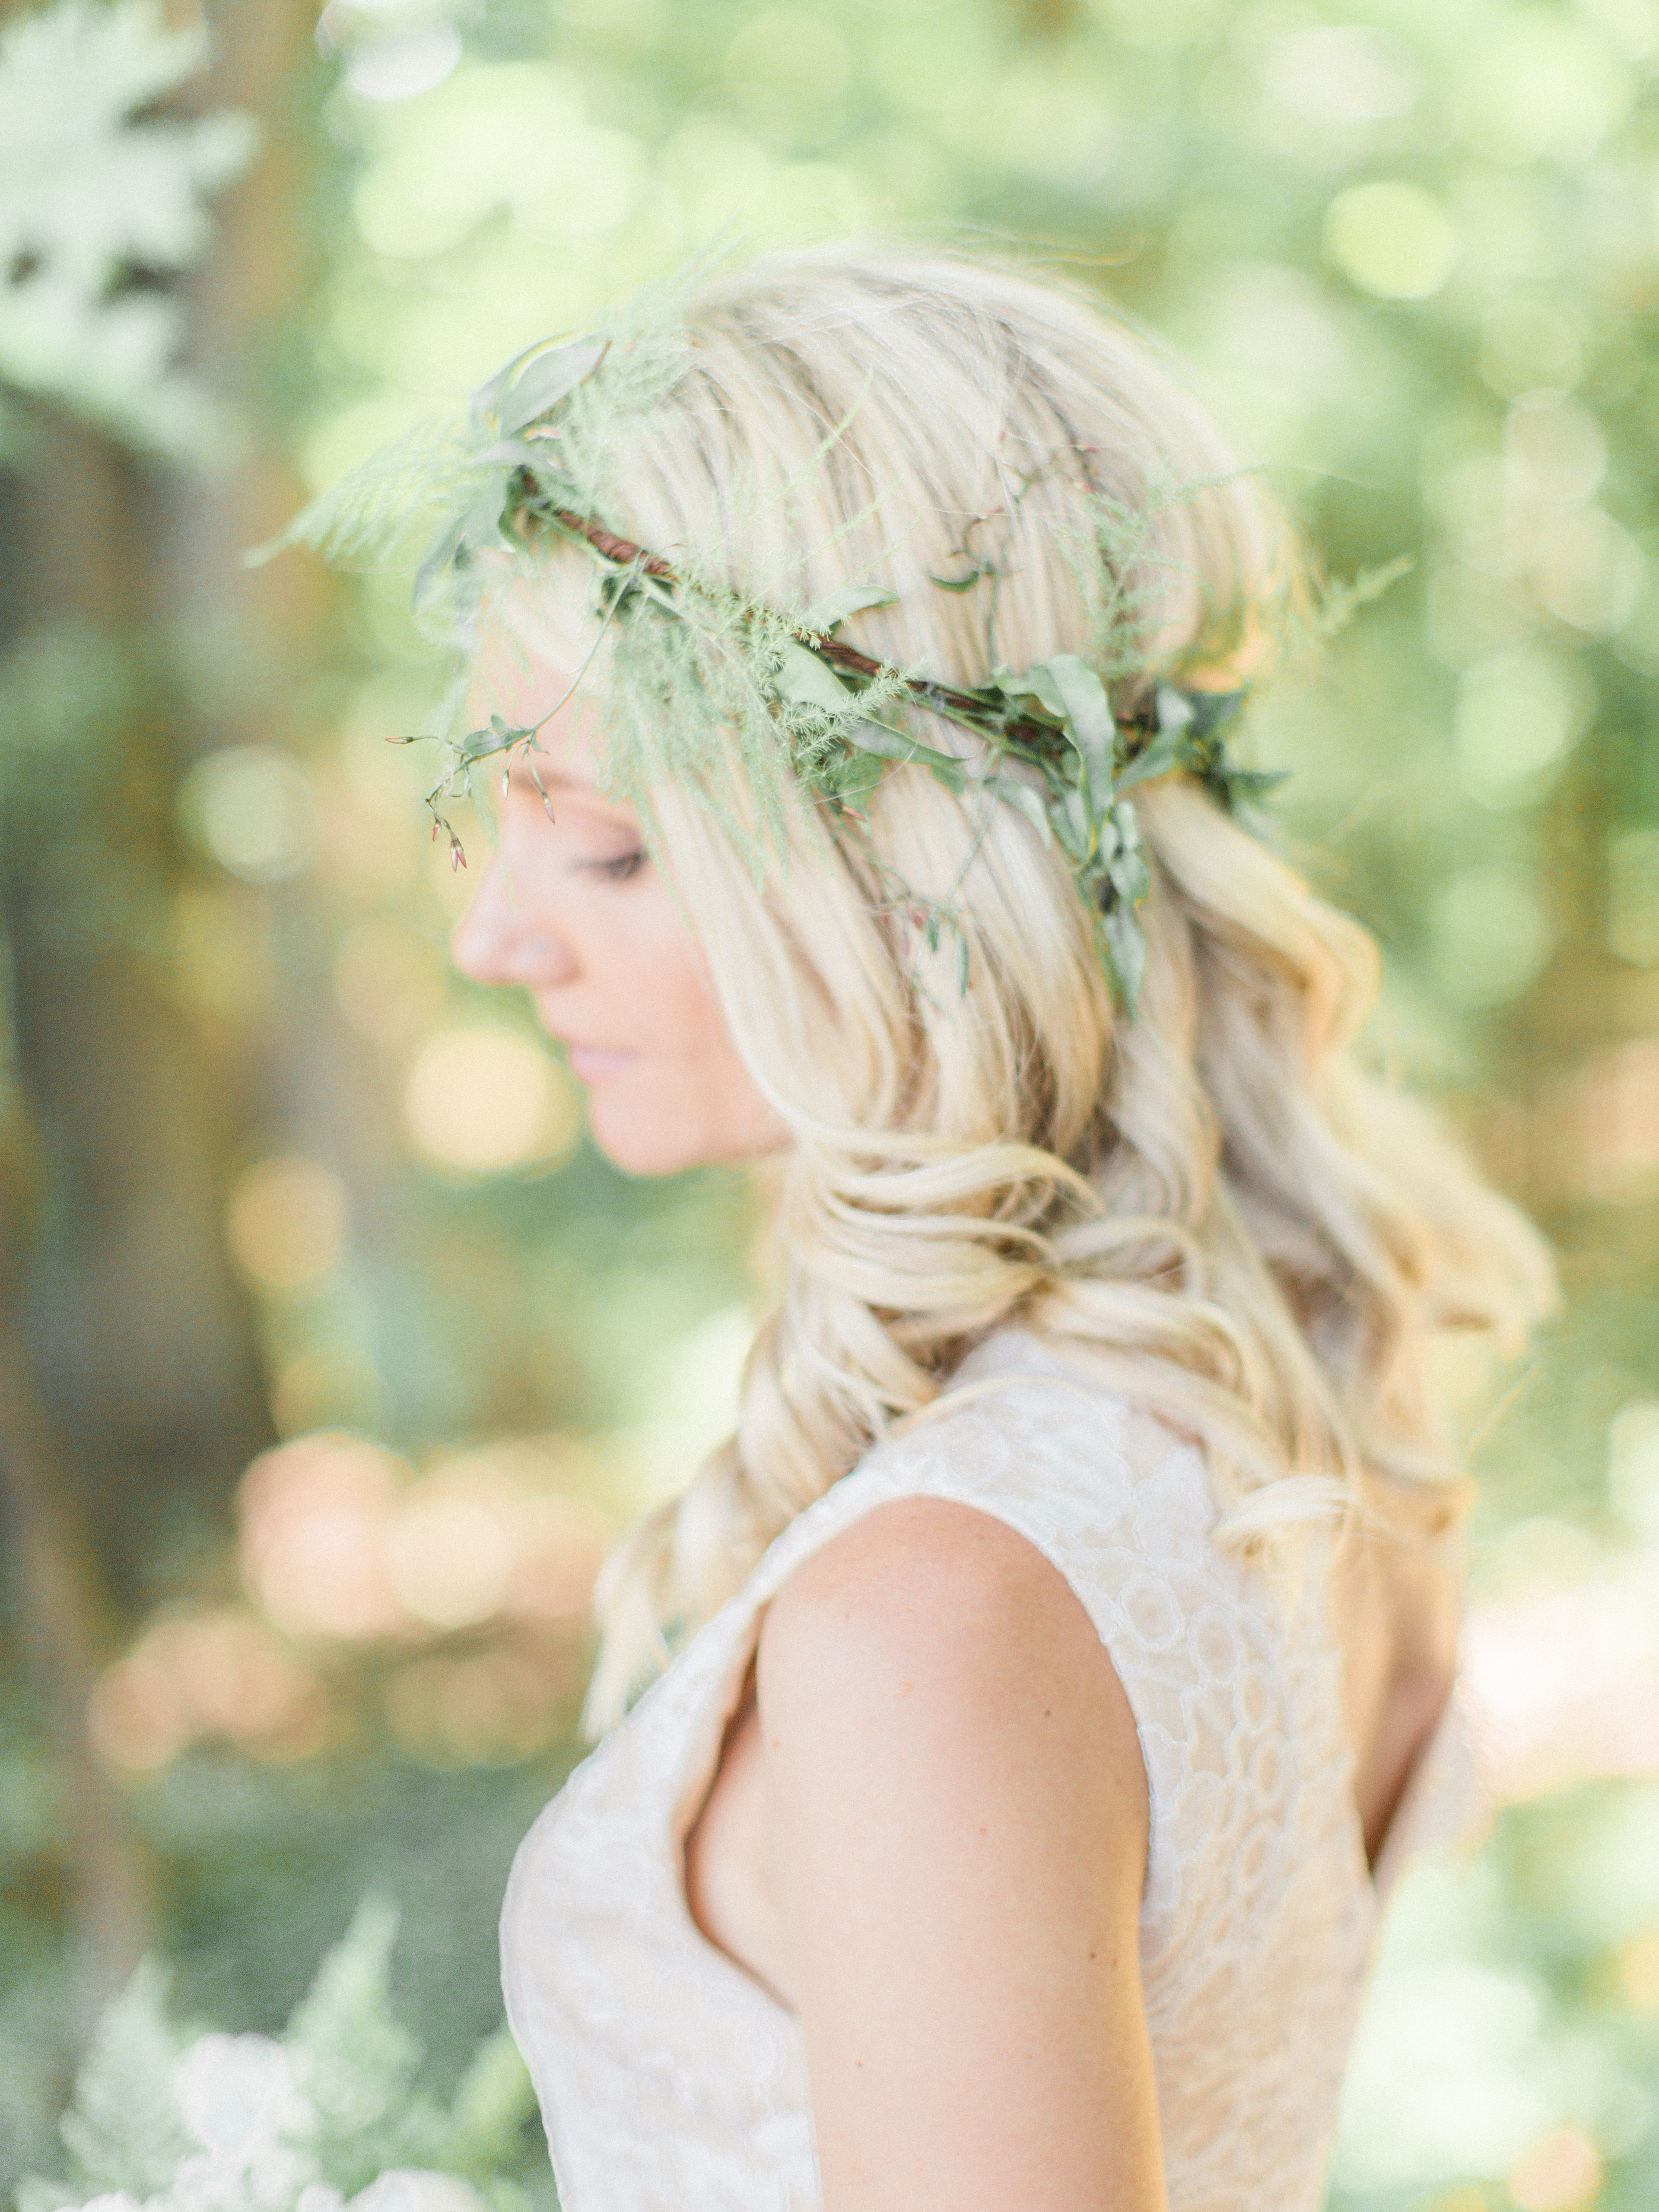 Whimsical Flower Crown | The Day's Design | Samantha James Photography